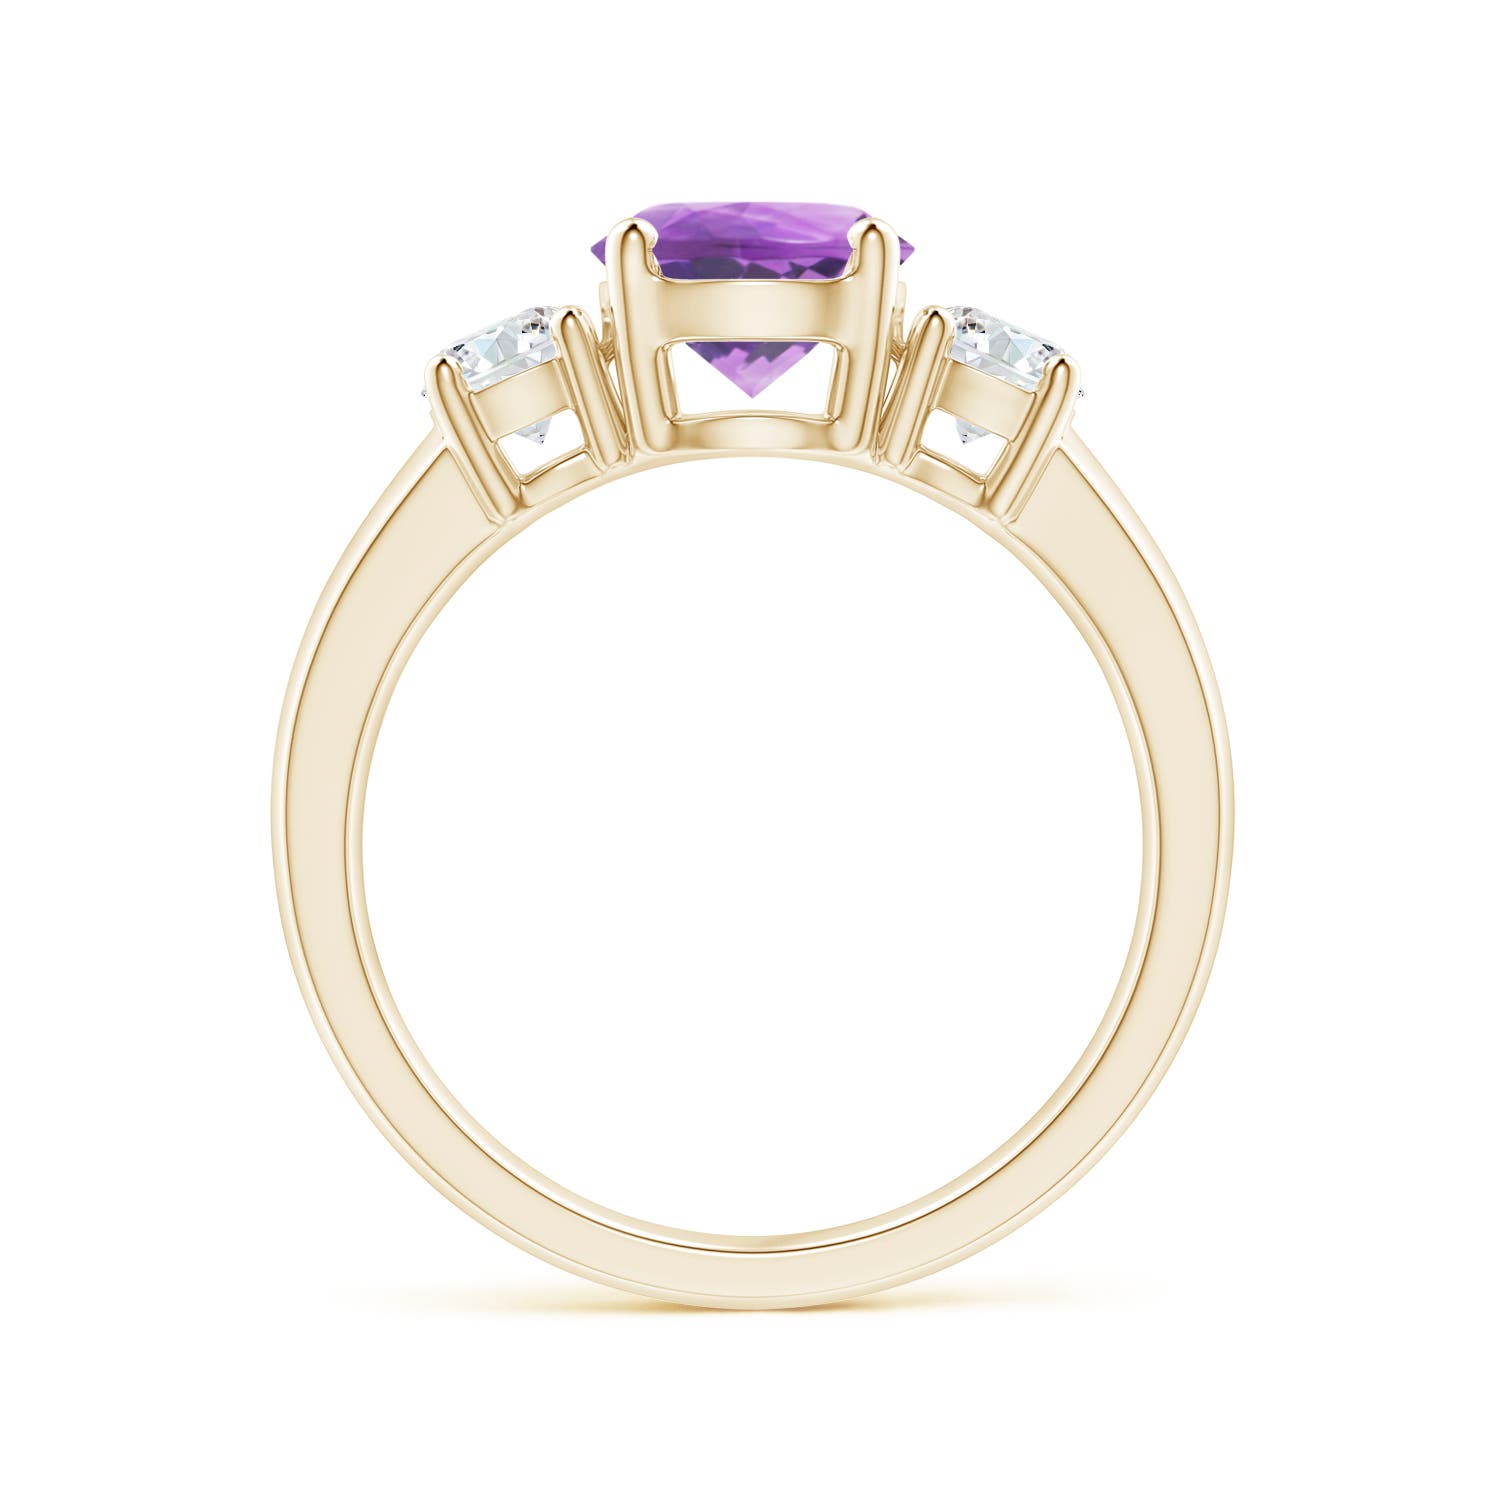 A - Amethyst / 1.61 CT / 14 KT Yellow Gold